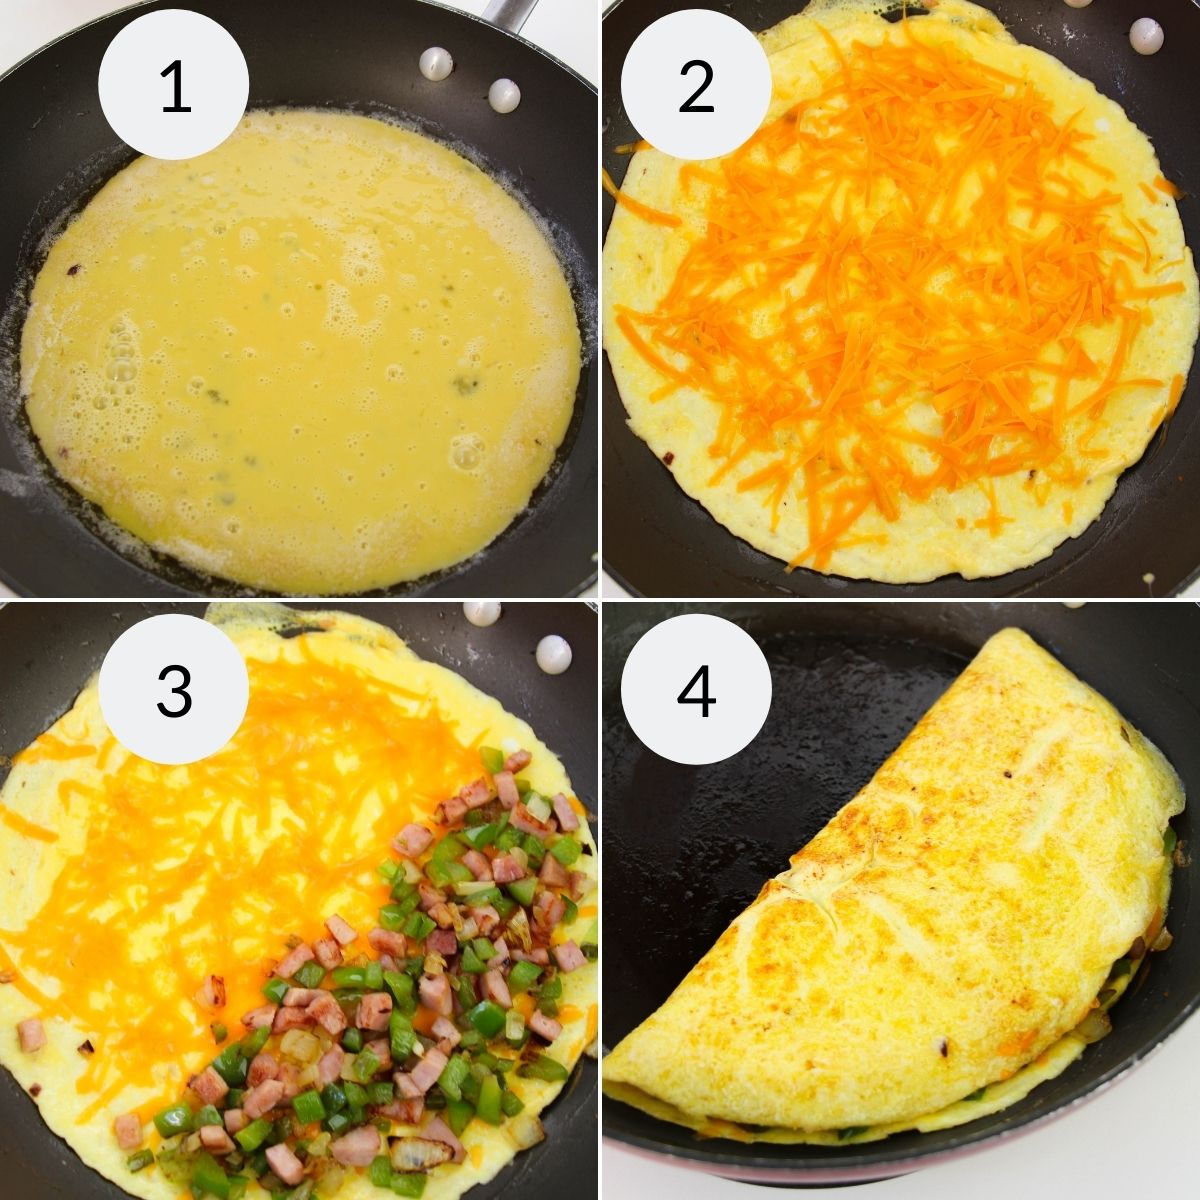 Cooking and finishing the omelette in the skillet.